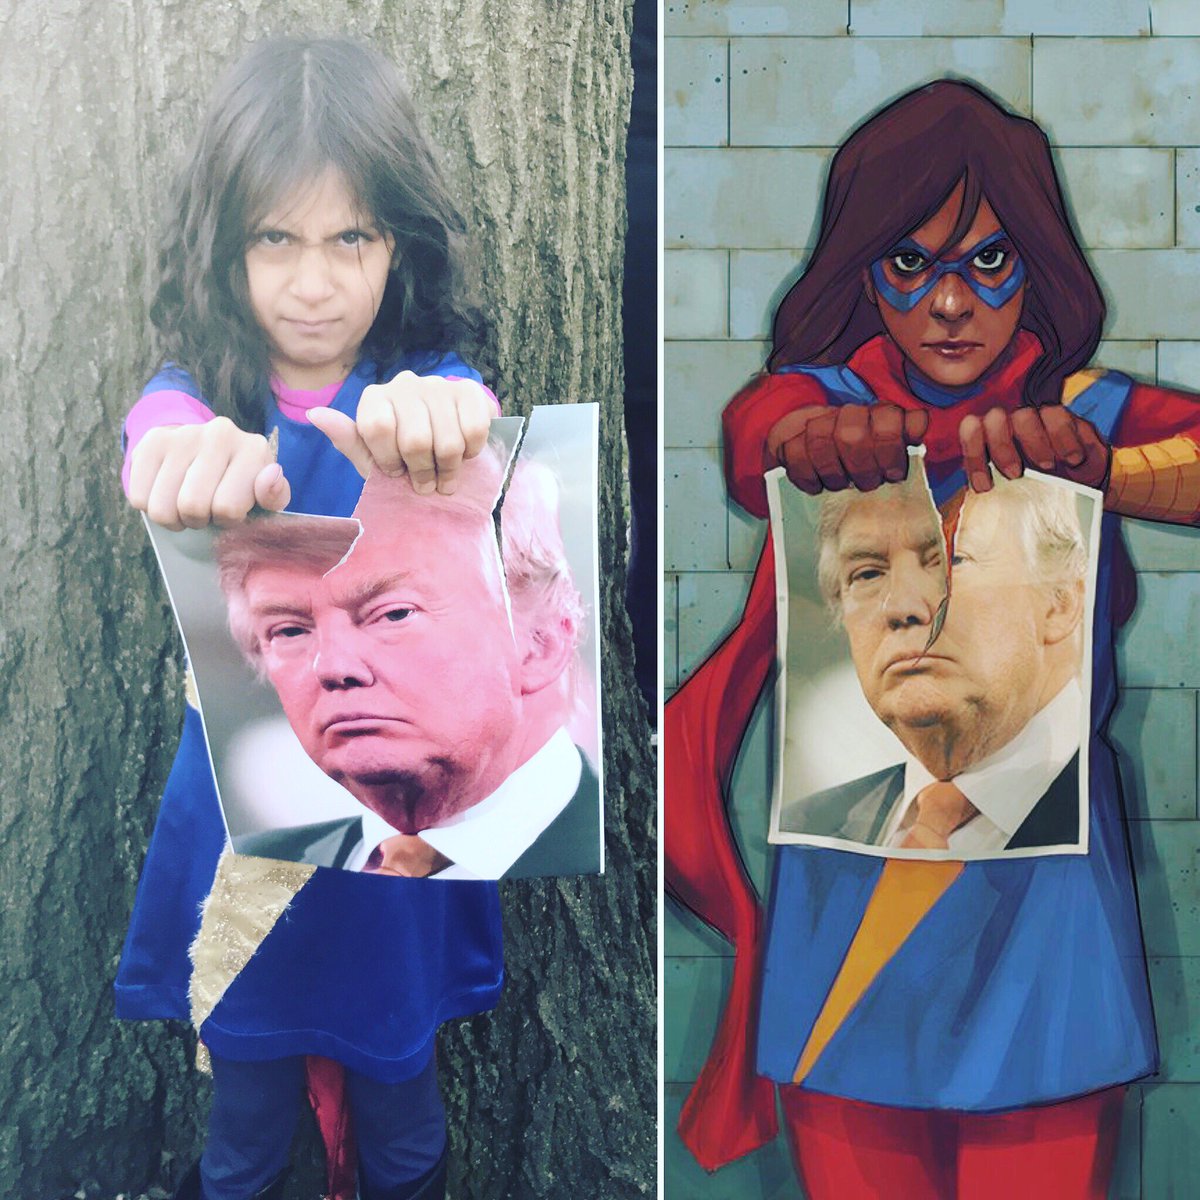 Two images: (1) Illustrated cover of Civil War II #0 with a picture of President Donald Trump replacing Captain Marvel. (2) Photo of young girl imitating Ms. Marvel tearing the photo of President Trump.